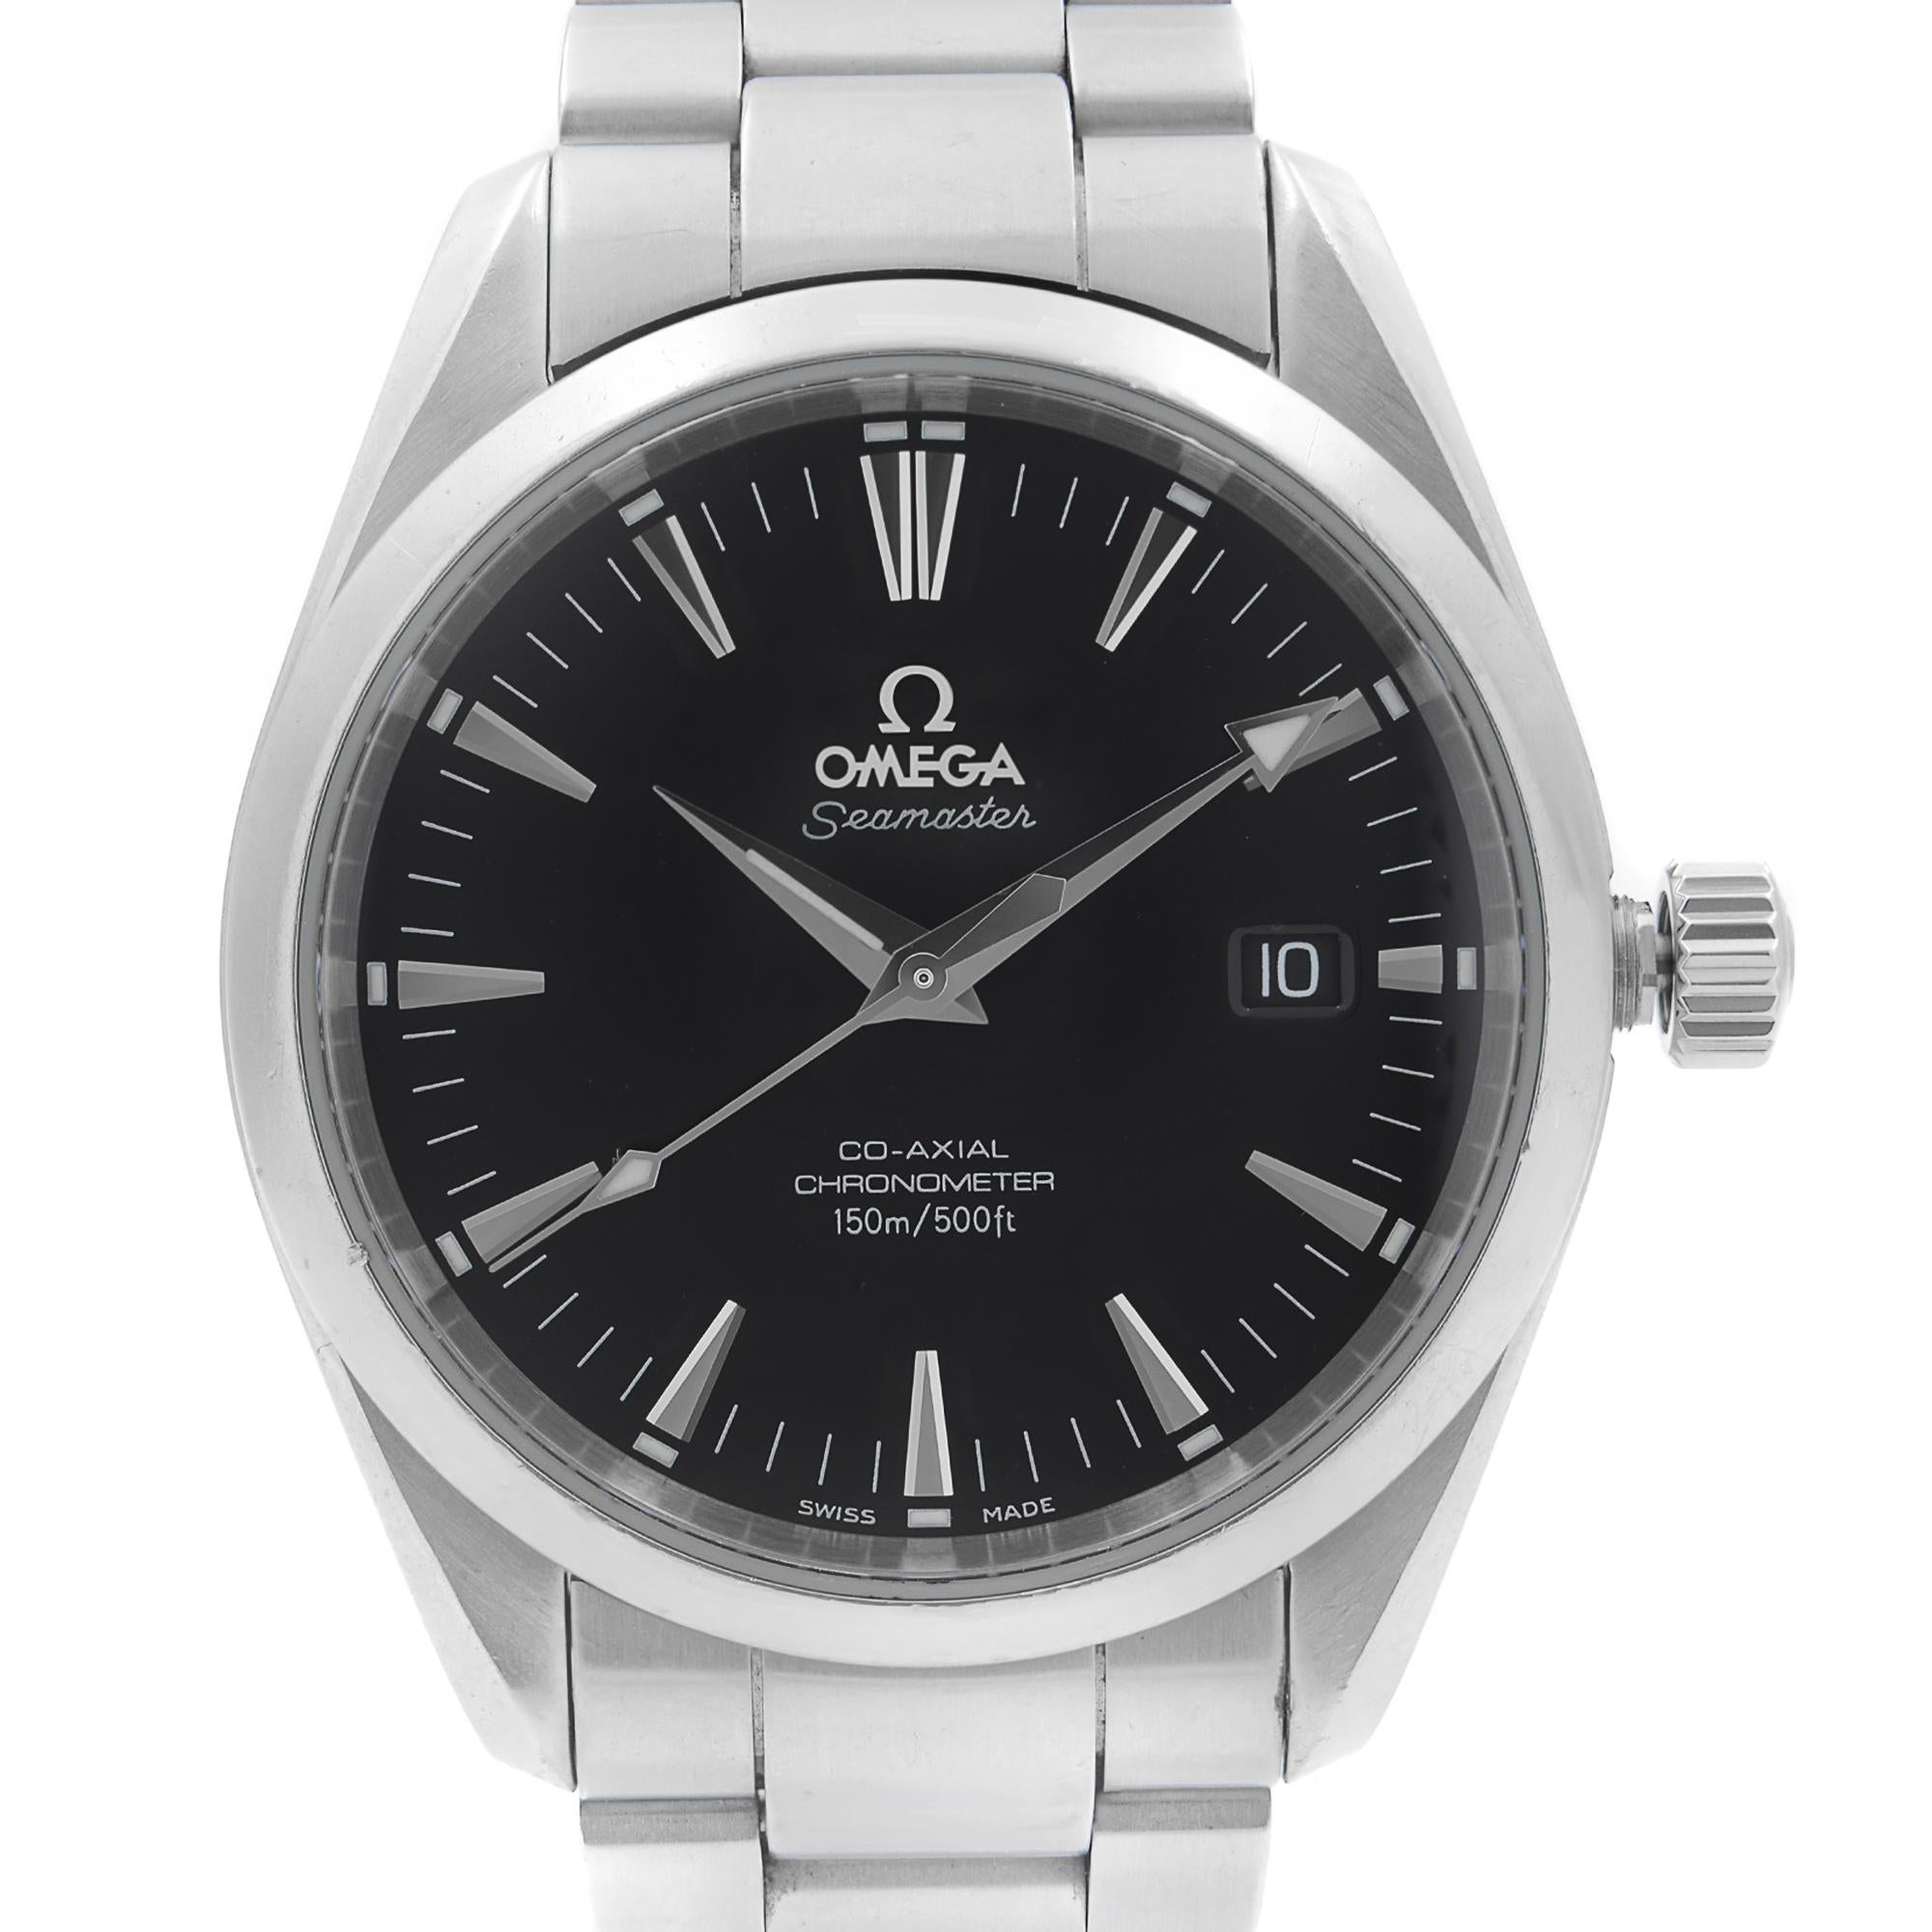 Pre Owned Omega Seamaster Aqua Terra 39mm Steel Black Dial Automatic Men's Watch 2503.50.00. This Beautiful Timepiece Features: Stainless Steel Case & Bracelet, Fixed Stainless Steel Bezel. Black Dial with Silver-Tone Hands and Index Hour Markers.